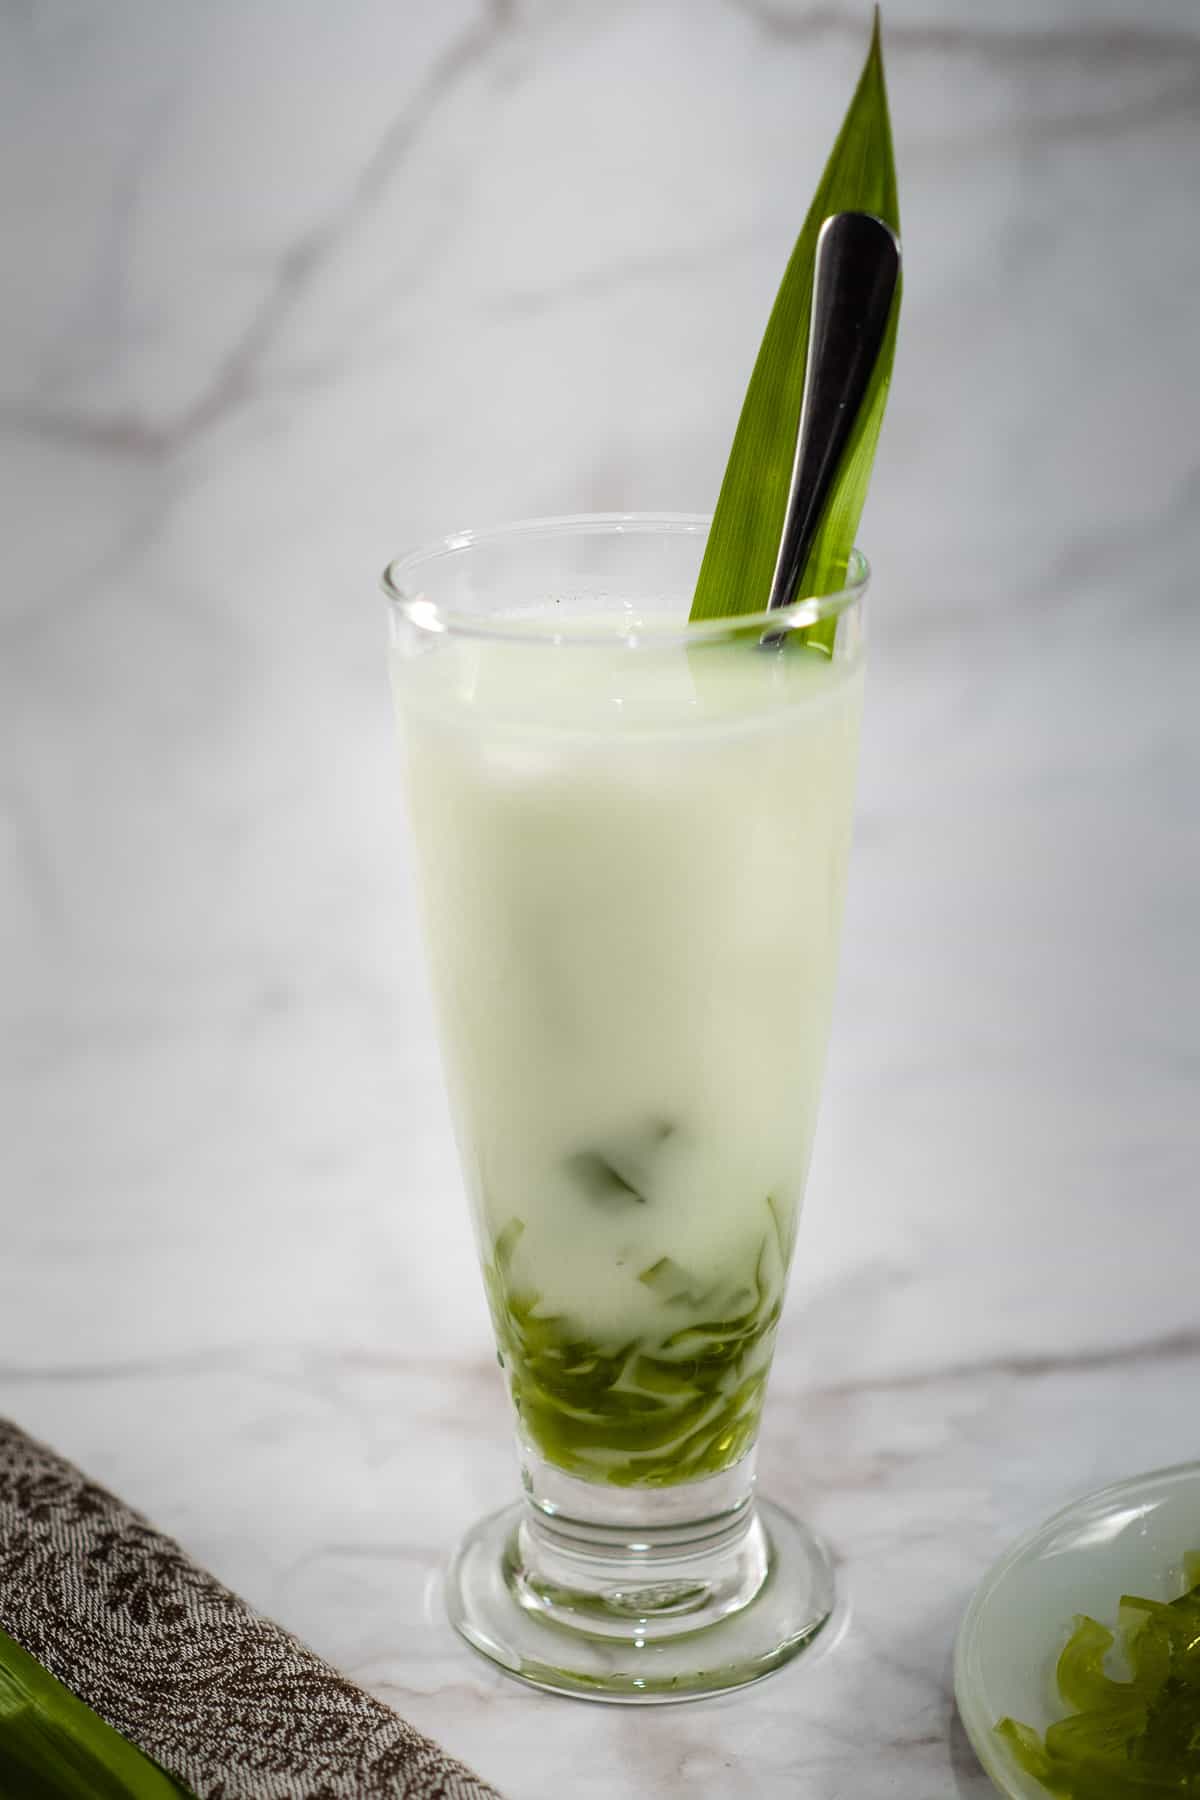 A tall glass of milk with green jelly boba strips.